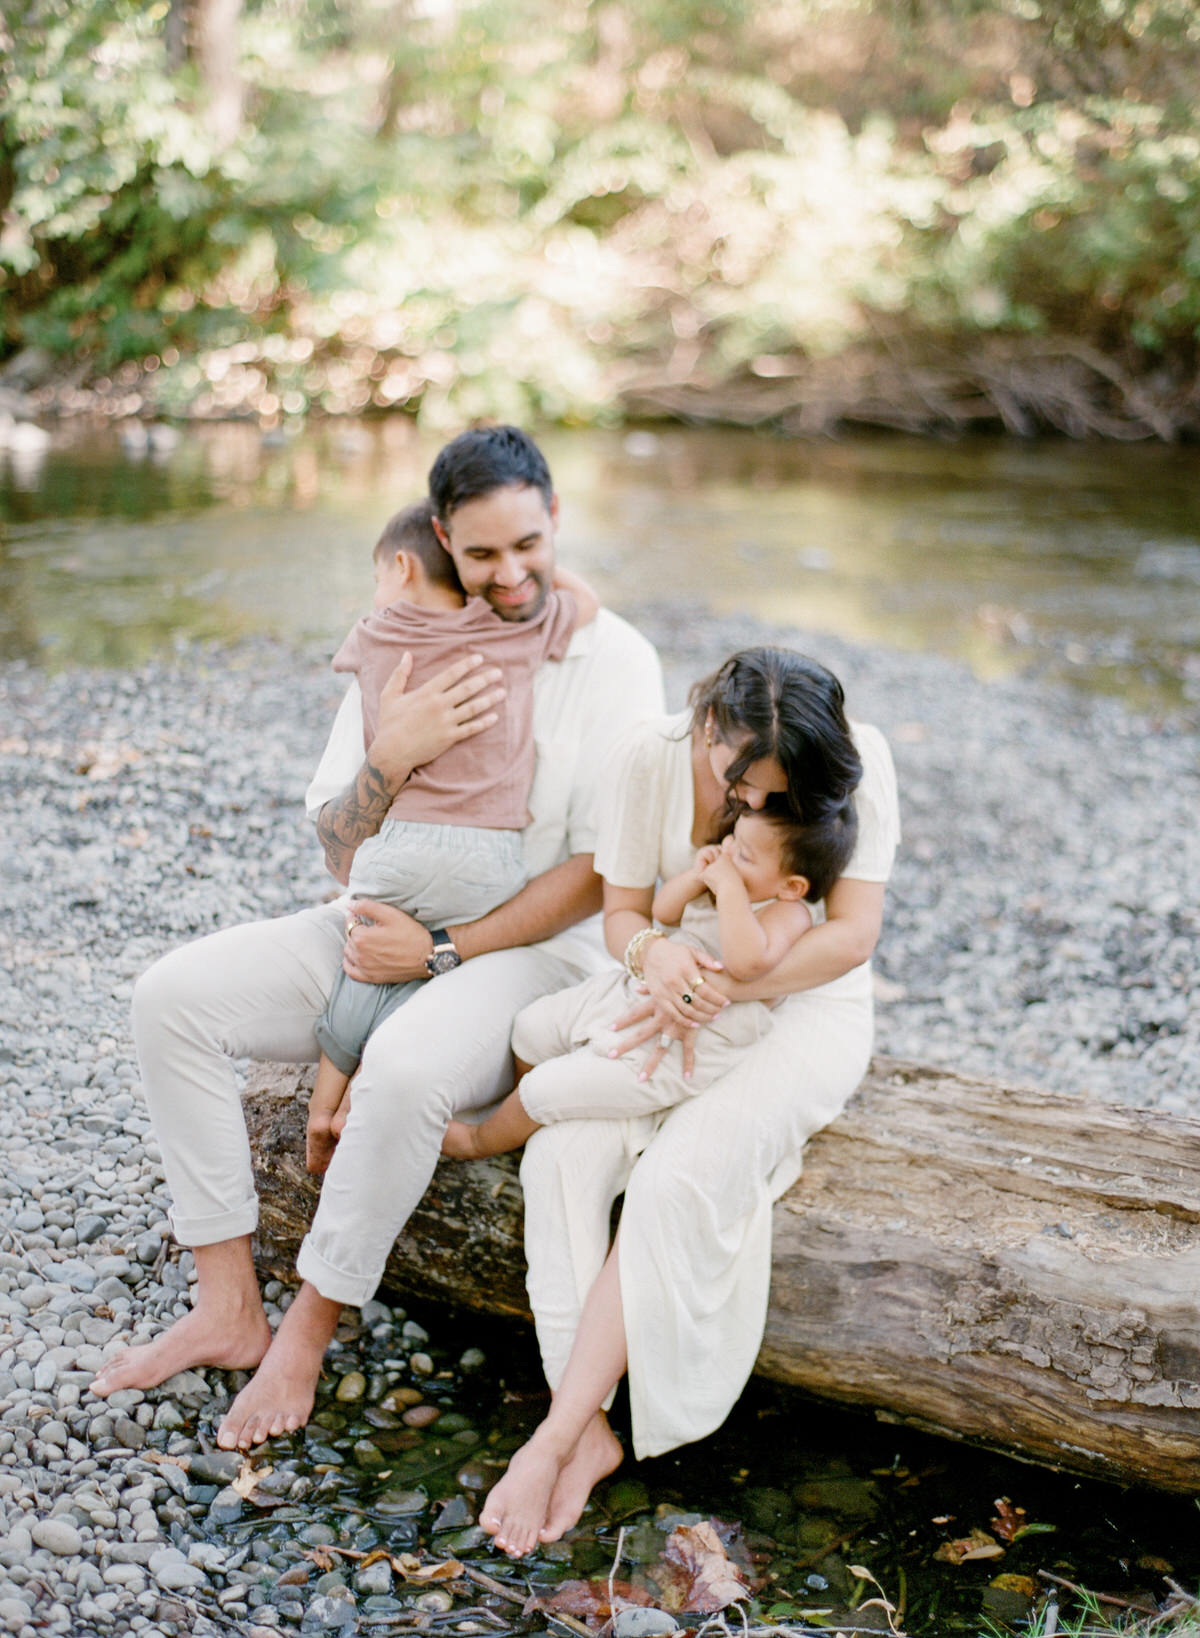 Light and airy family photography - Charlotte Family Photography on Film - Charlotte Family Photography - Charlotte Family Photographer - Luxury Family Photography - Family Pictures on Film - San Francisco Bay Area Family Session on Film - Kent Avenue Photography - www.kentavenuephotography.com